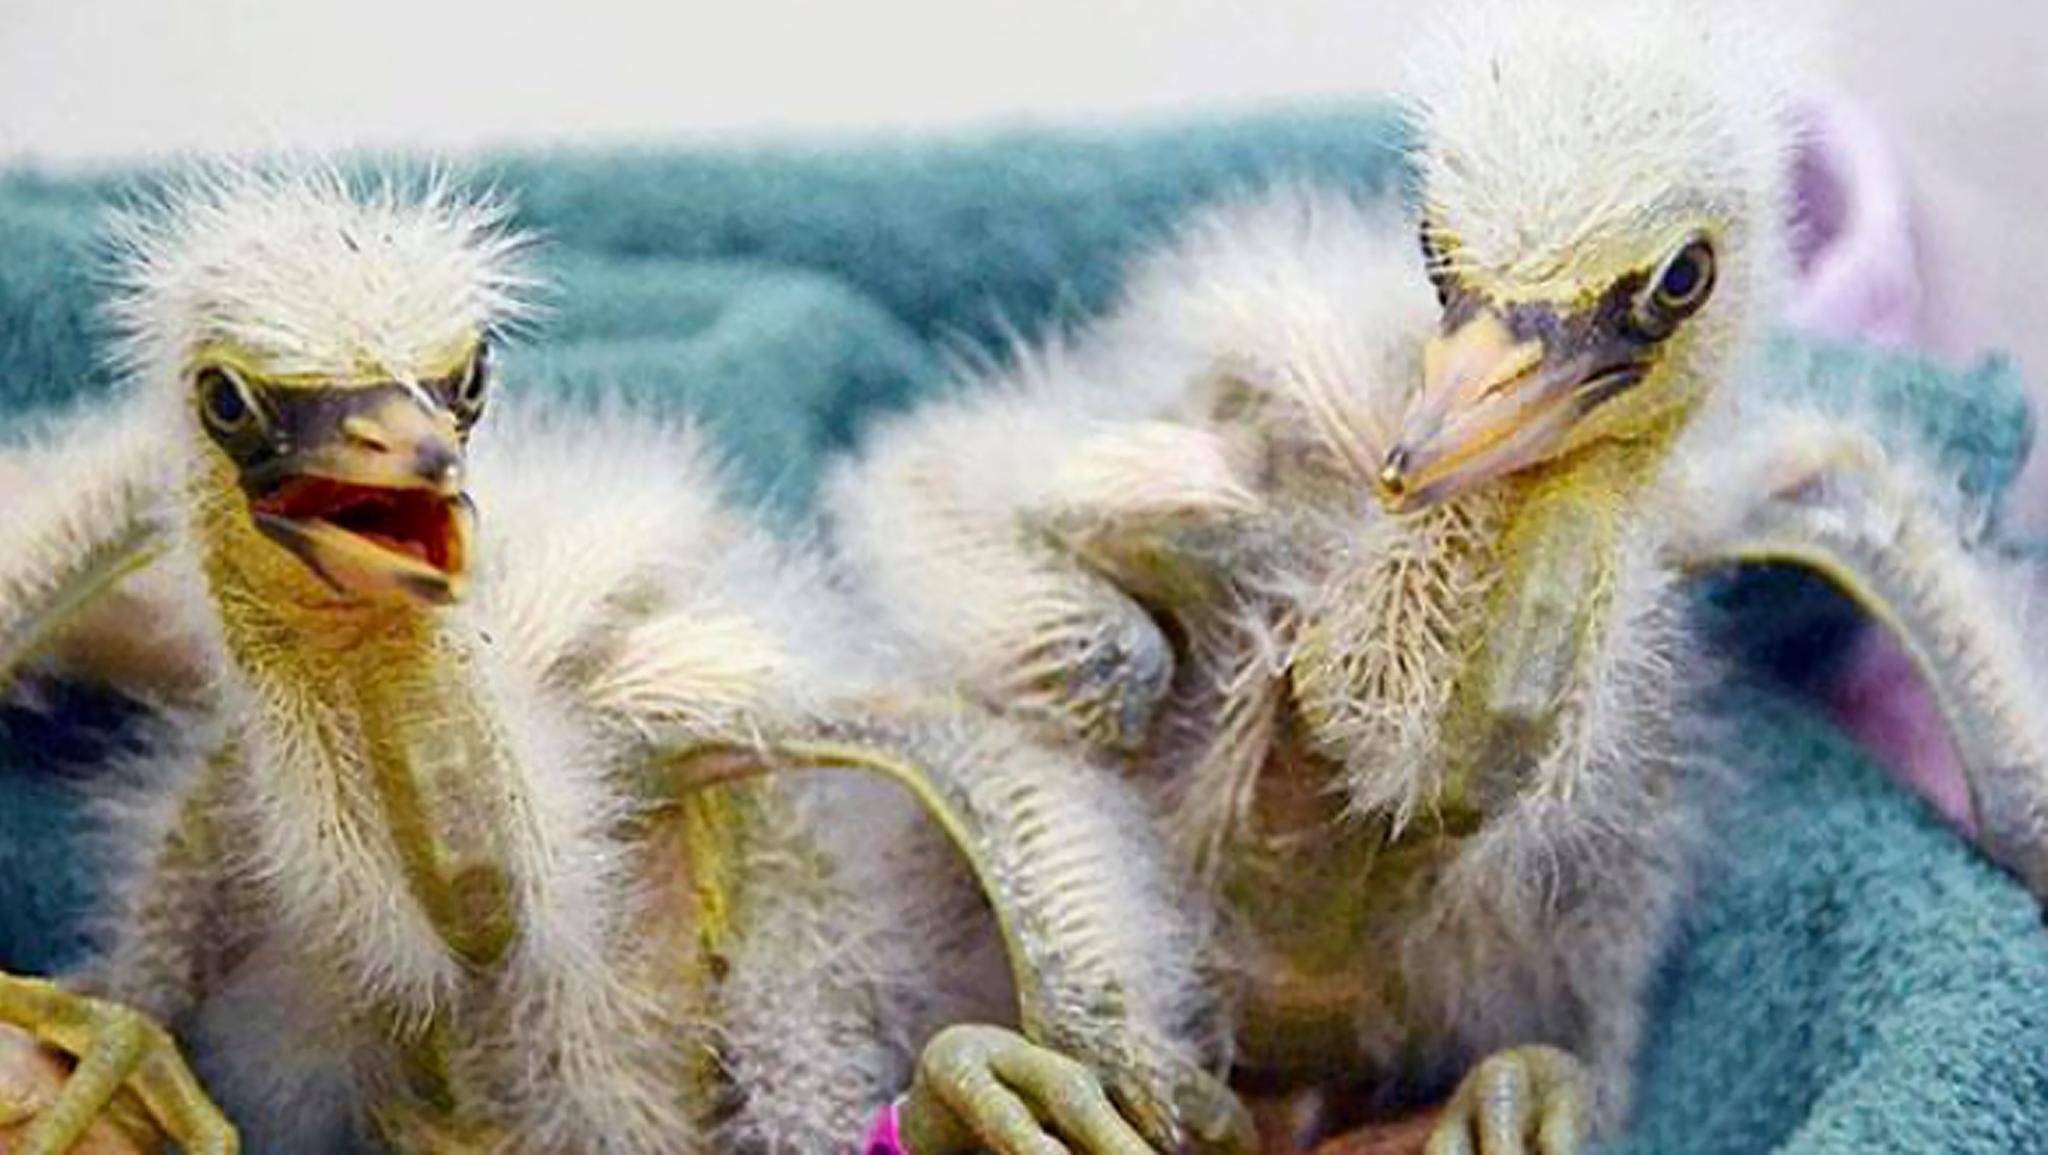 Rescued baby snowy egrets being cared for in Fairfield, California